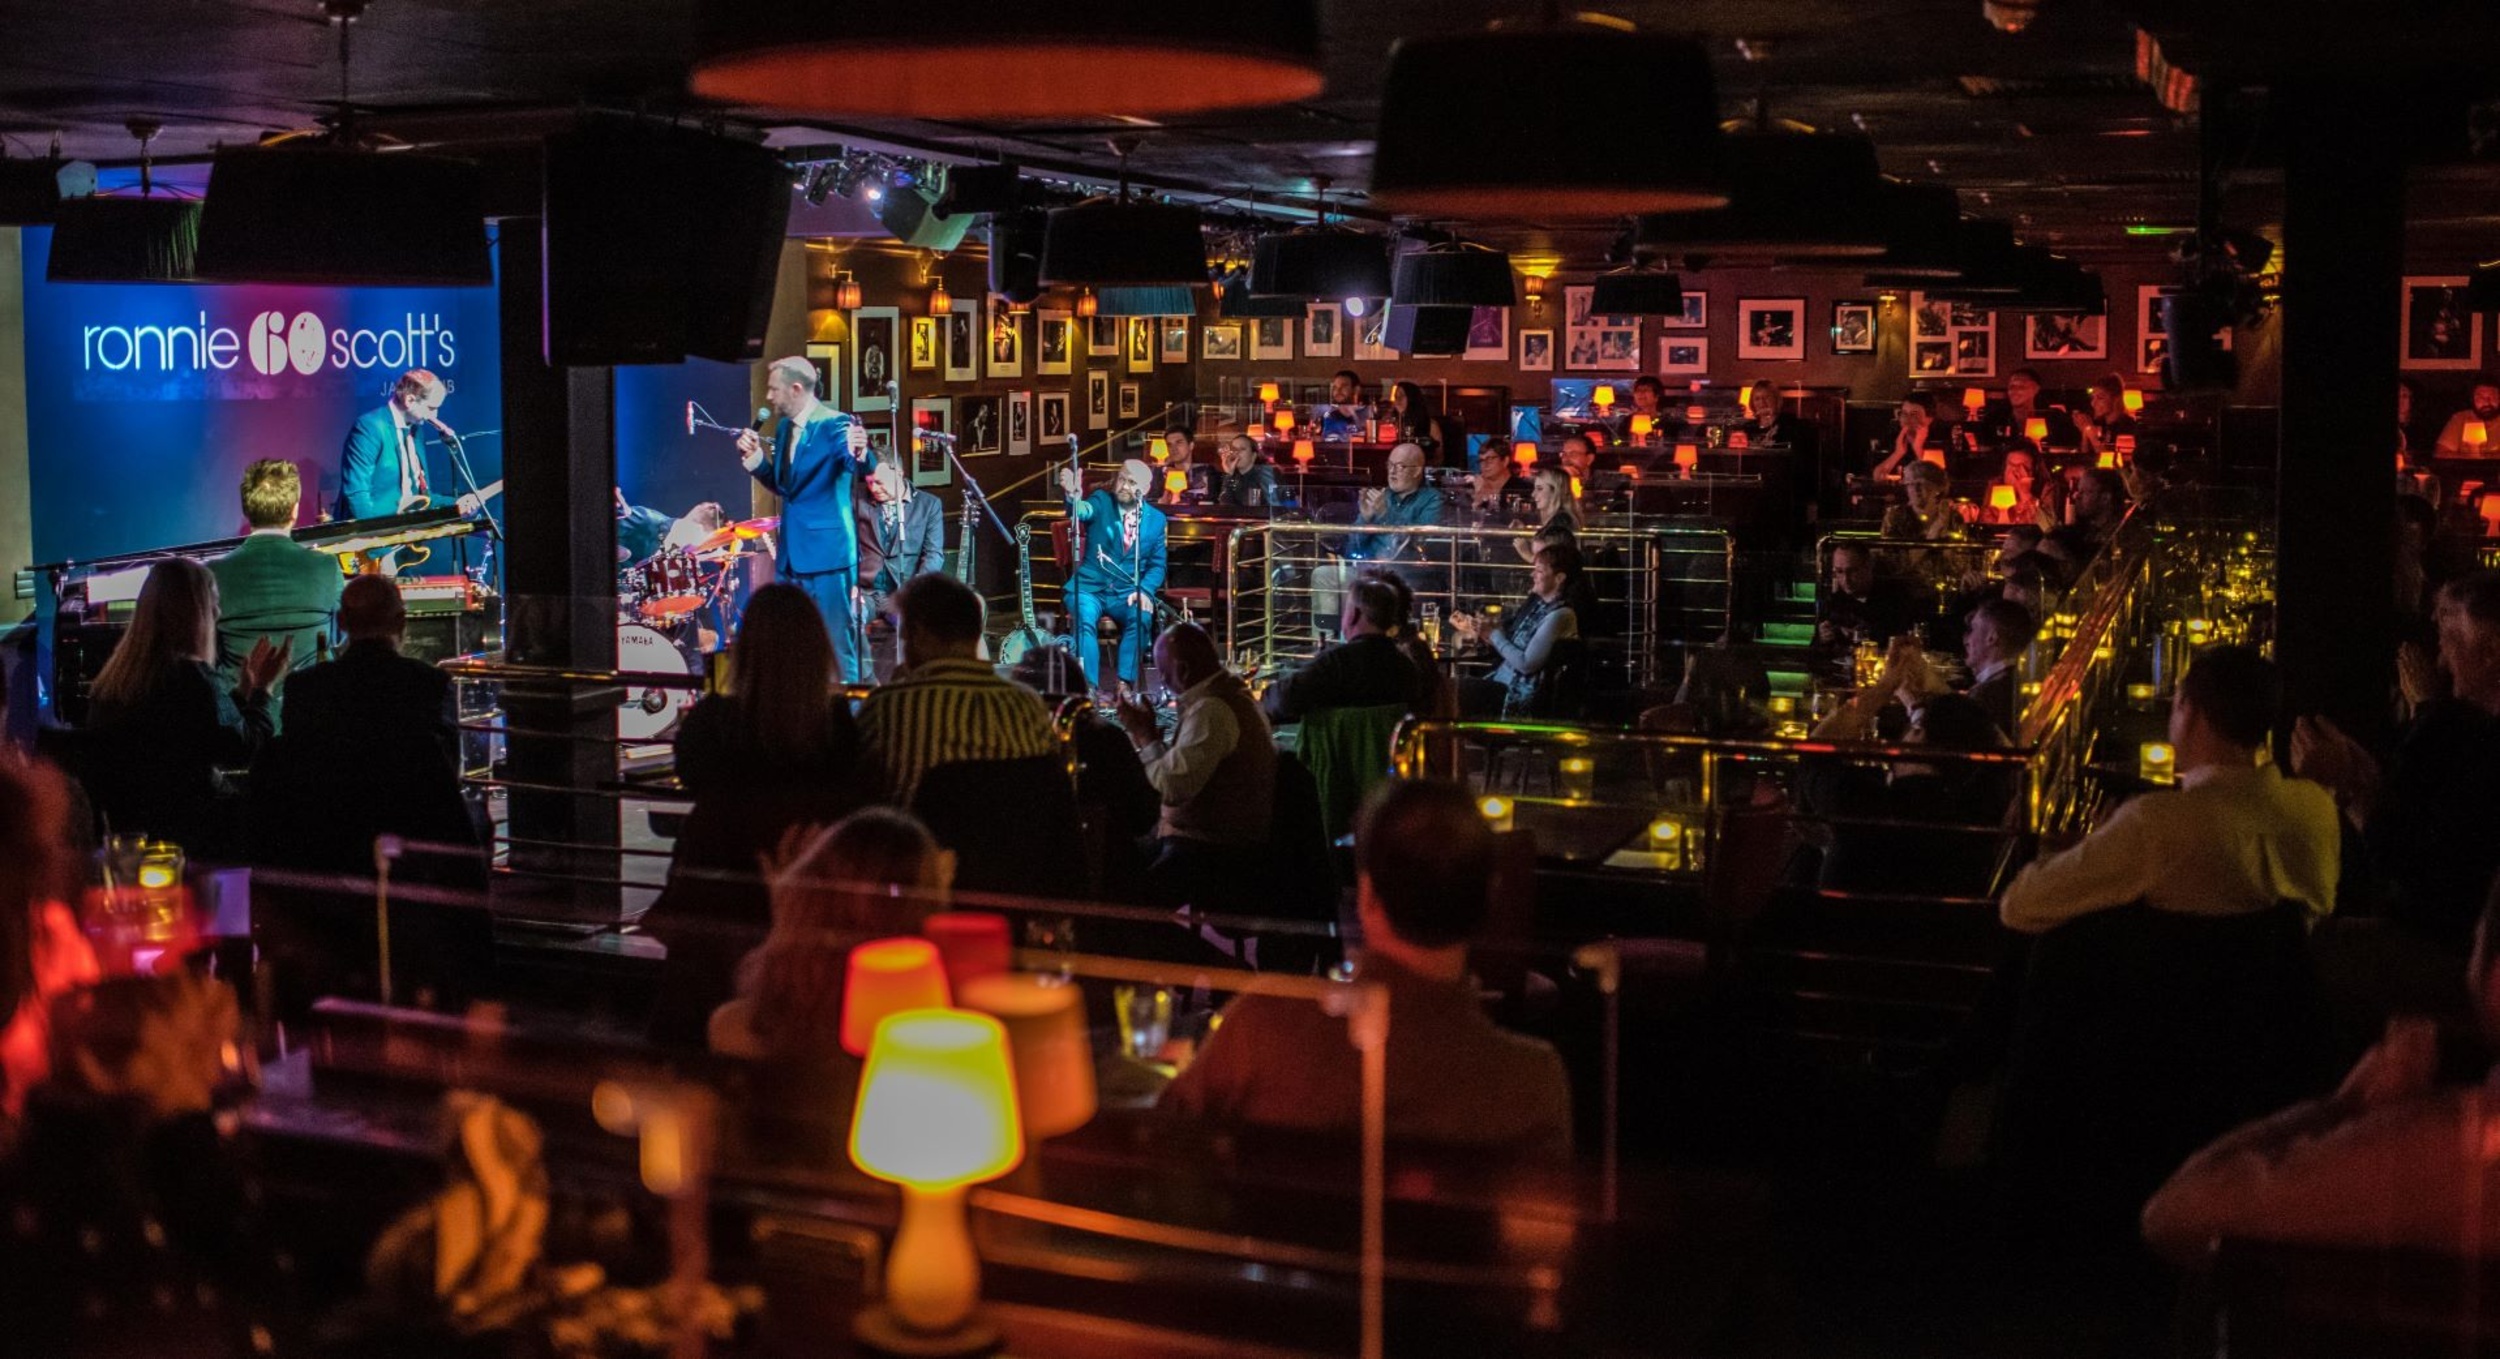 <p>From Miles Davis to John Coltrane to Nina Simone, all the legends have played Ronnie Scott's. It's one of the great concert venues in Europe, so you'll need to book your tickets in advance. This place fills up faster than a drive-through, so get there early and check the schedule ahead of time. </p><p><a href='https://www.msn.com/en-us/community/channel/vid-cj9pqbr0vn9in2b6ddcd8sfgpfq6x6utp44fssrv6mc2gtybw0us'>Follow us on MSN to see more of our exclusive lifestyle content.</a></p>